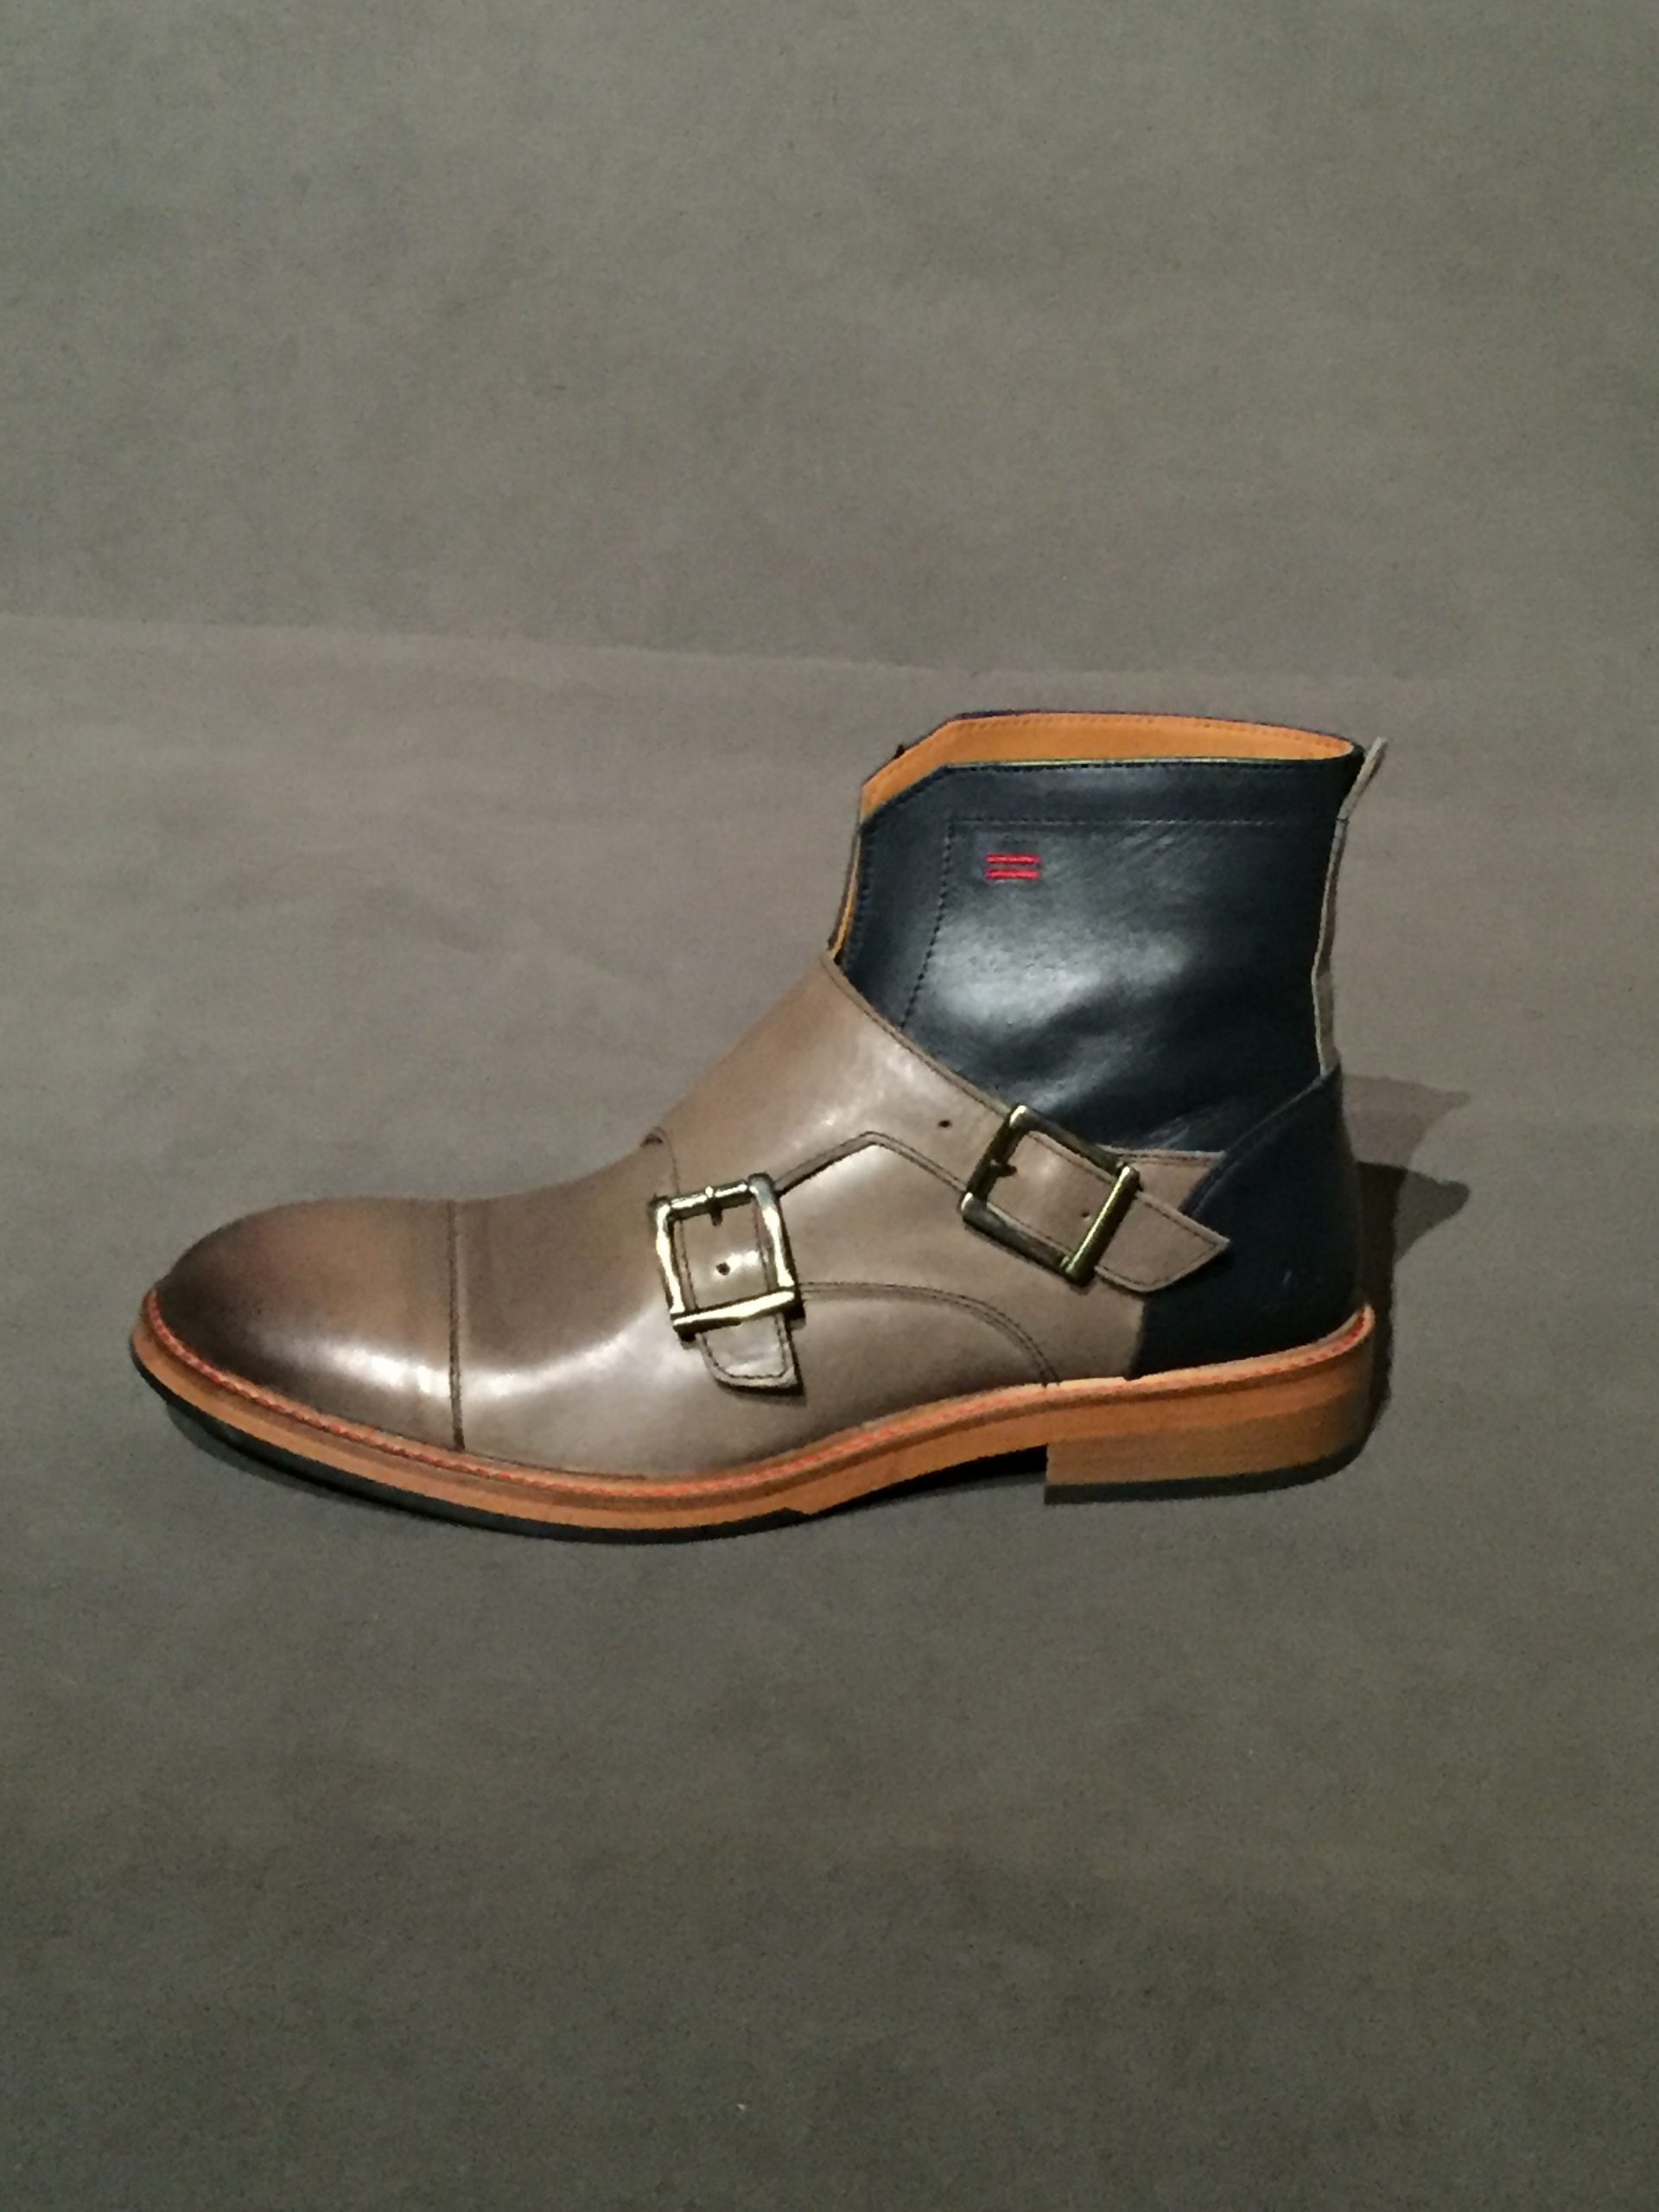 Side view of two-tone grey and blue chelsea boot with side buckle